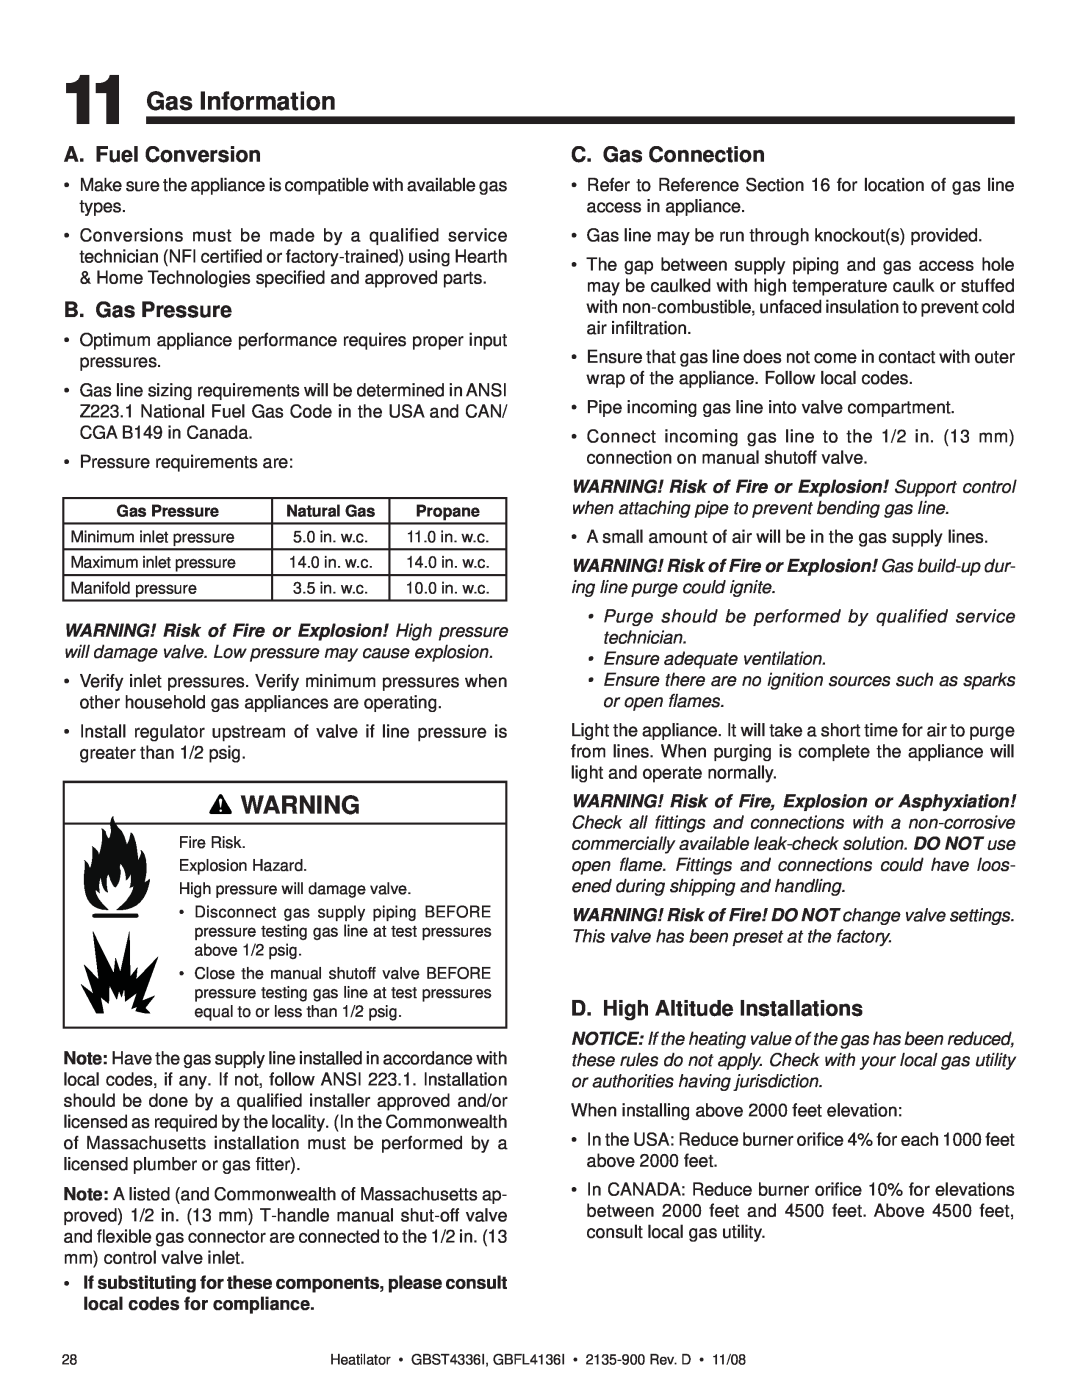 Hearth and Home Technologies GBFL4136I, GBST4336I Gas Information, A. Fuel Conversion, B. Gas Pressure, C. Gas Connection 